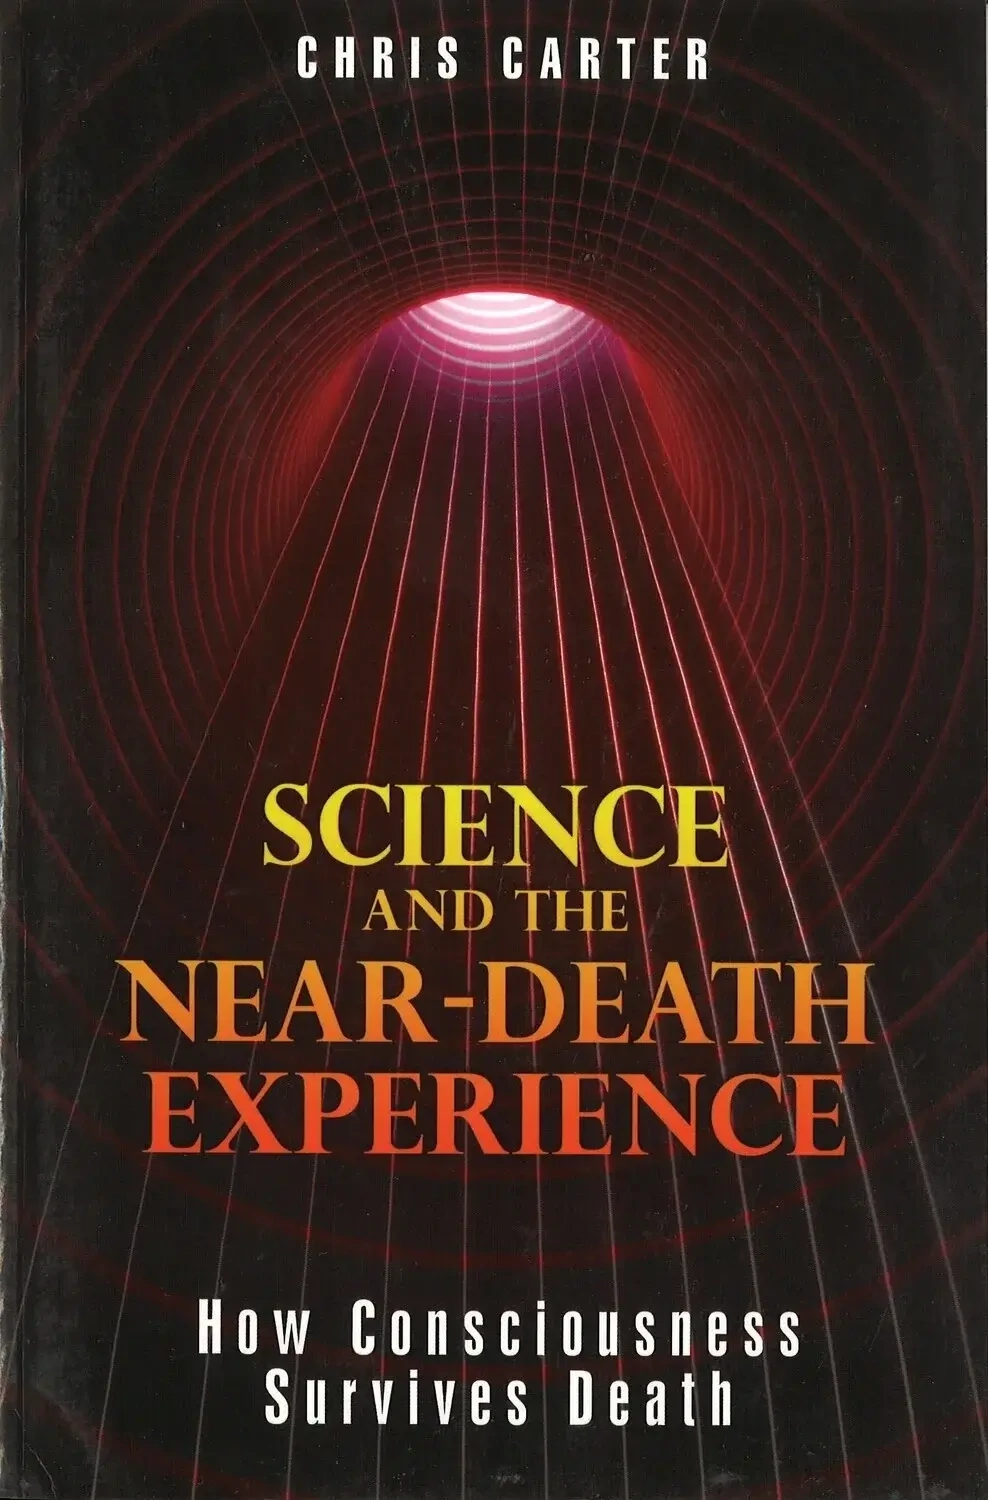 Science and the Near-Death Experience by Chris Carter